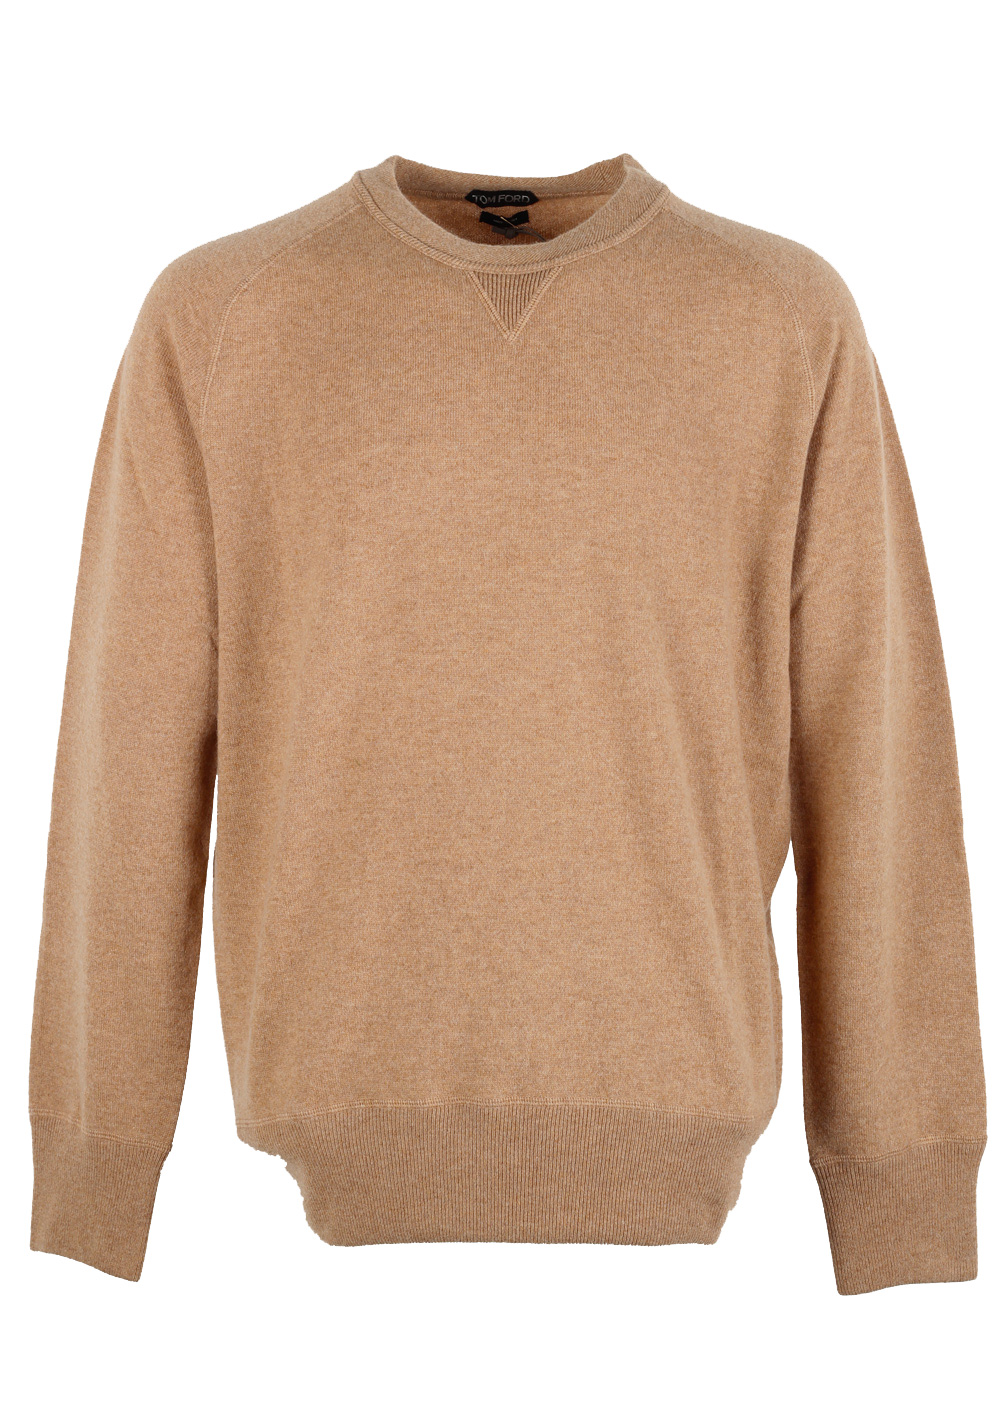 TOM FORD Camel Crew Neck Sweater Size 58 / 48R U.S. In Cashmere | Costume Limité